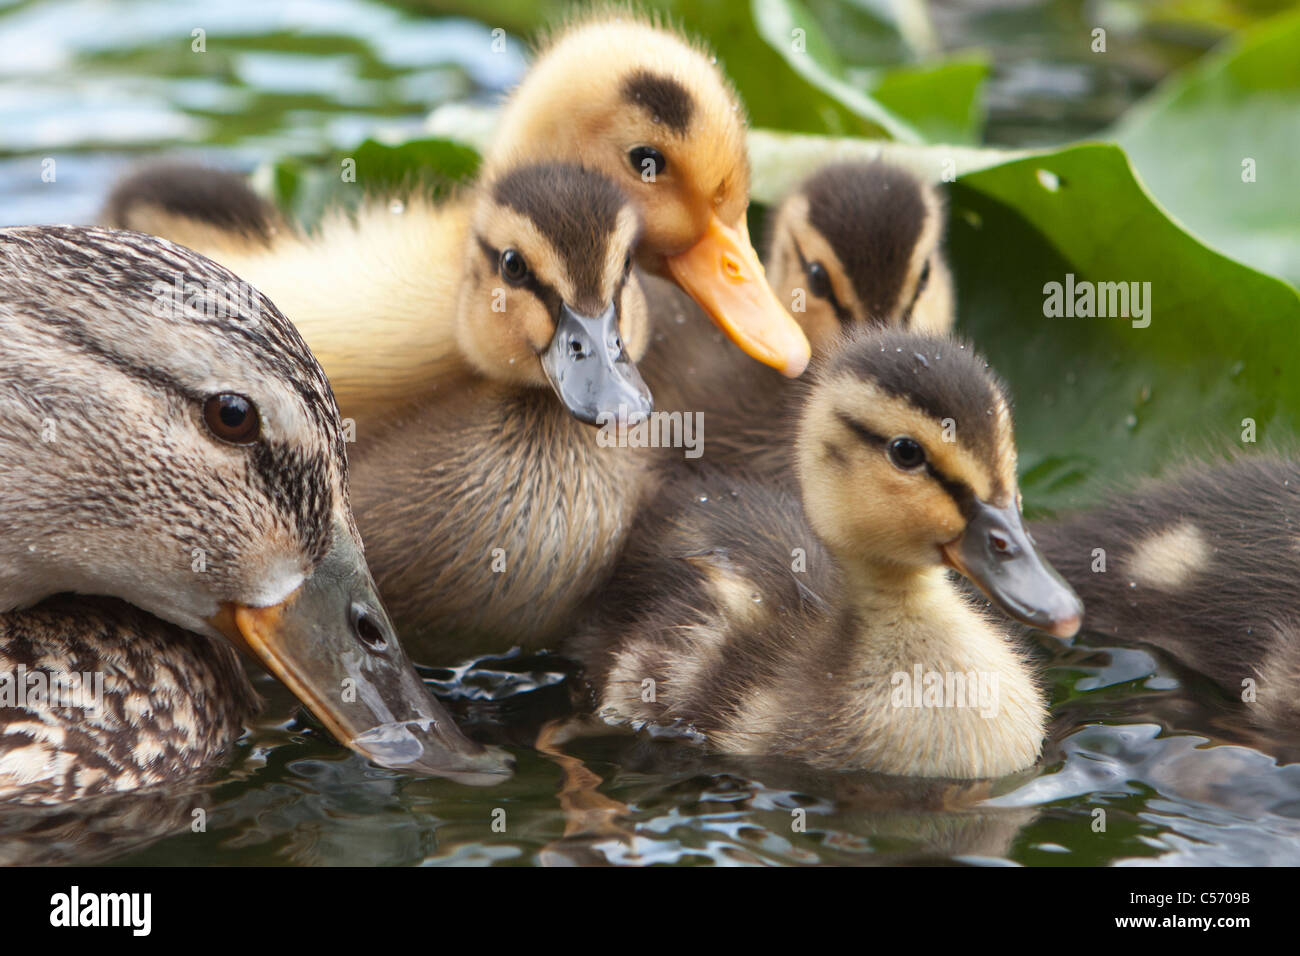 The Netherlands, 's-Graveland, Young ducks and mother in pond. Ducklings. Stock Photo